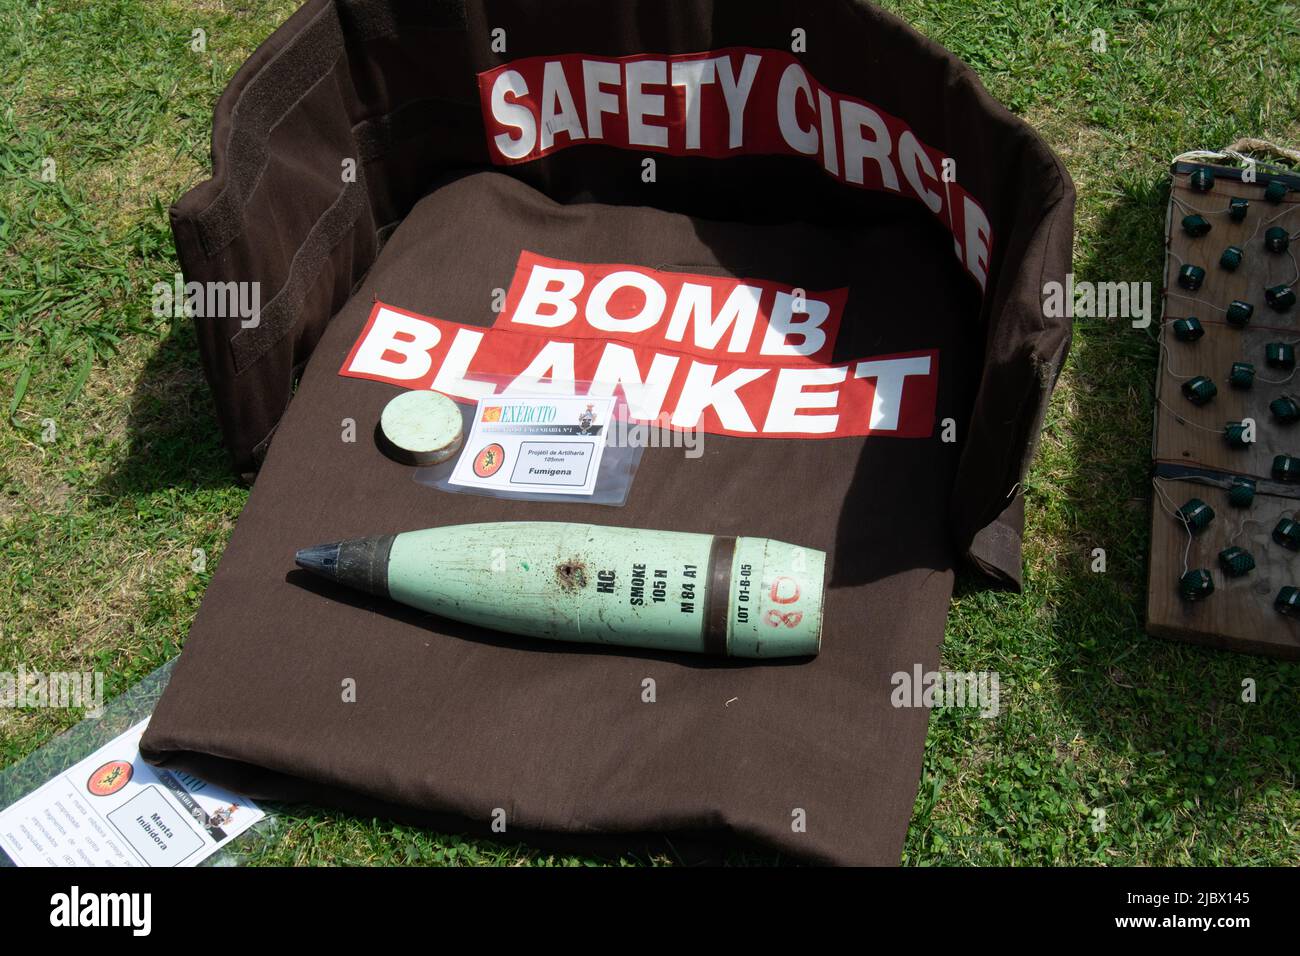 Safety bomb blanket used in bomb defusing activities by special forces. Anti terrorism and handling explosives. Safety circle. Stock Photo